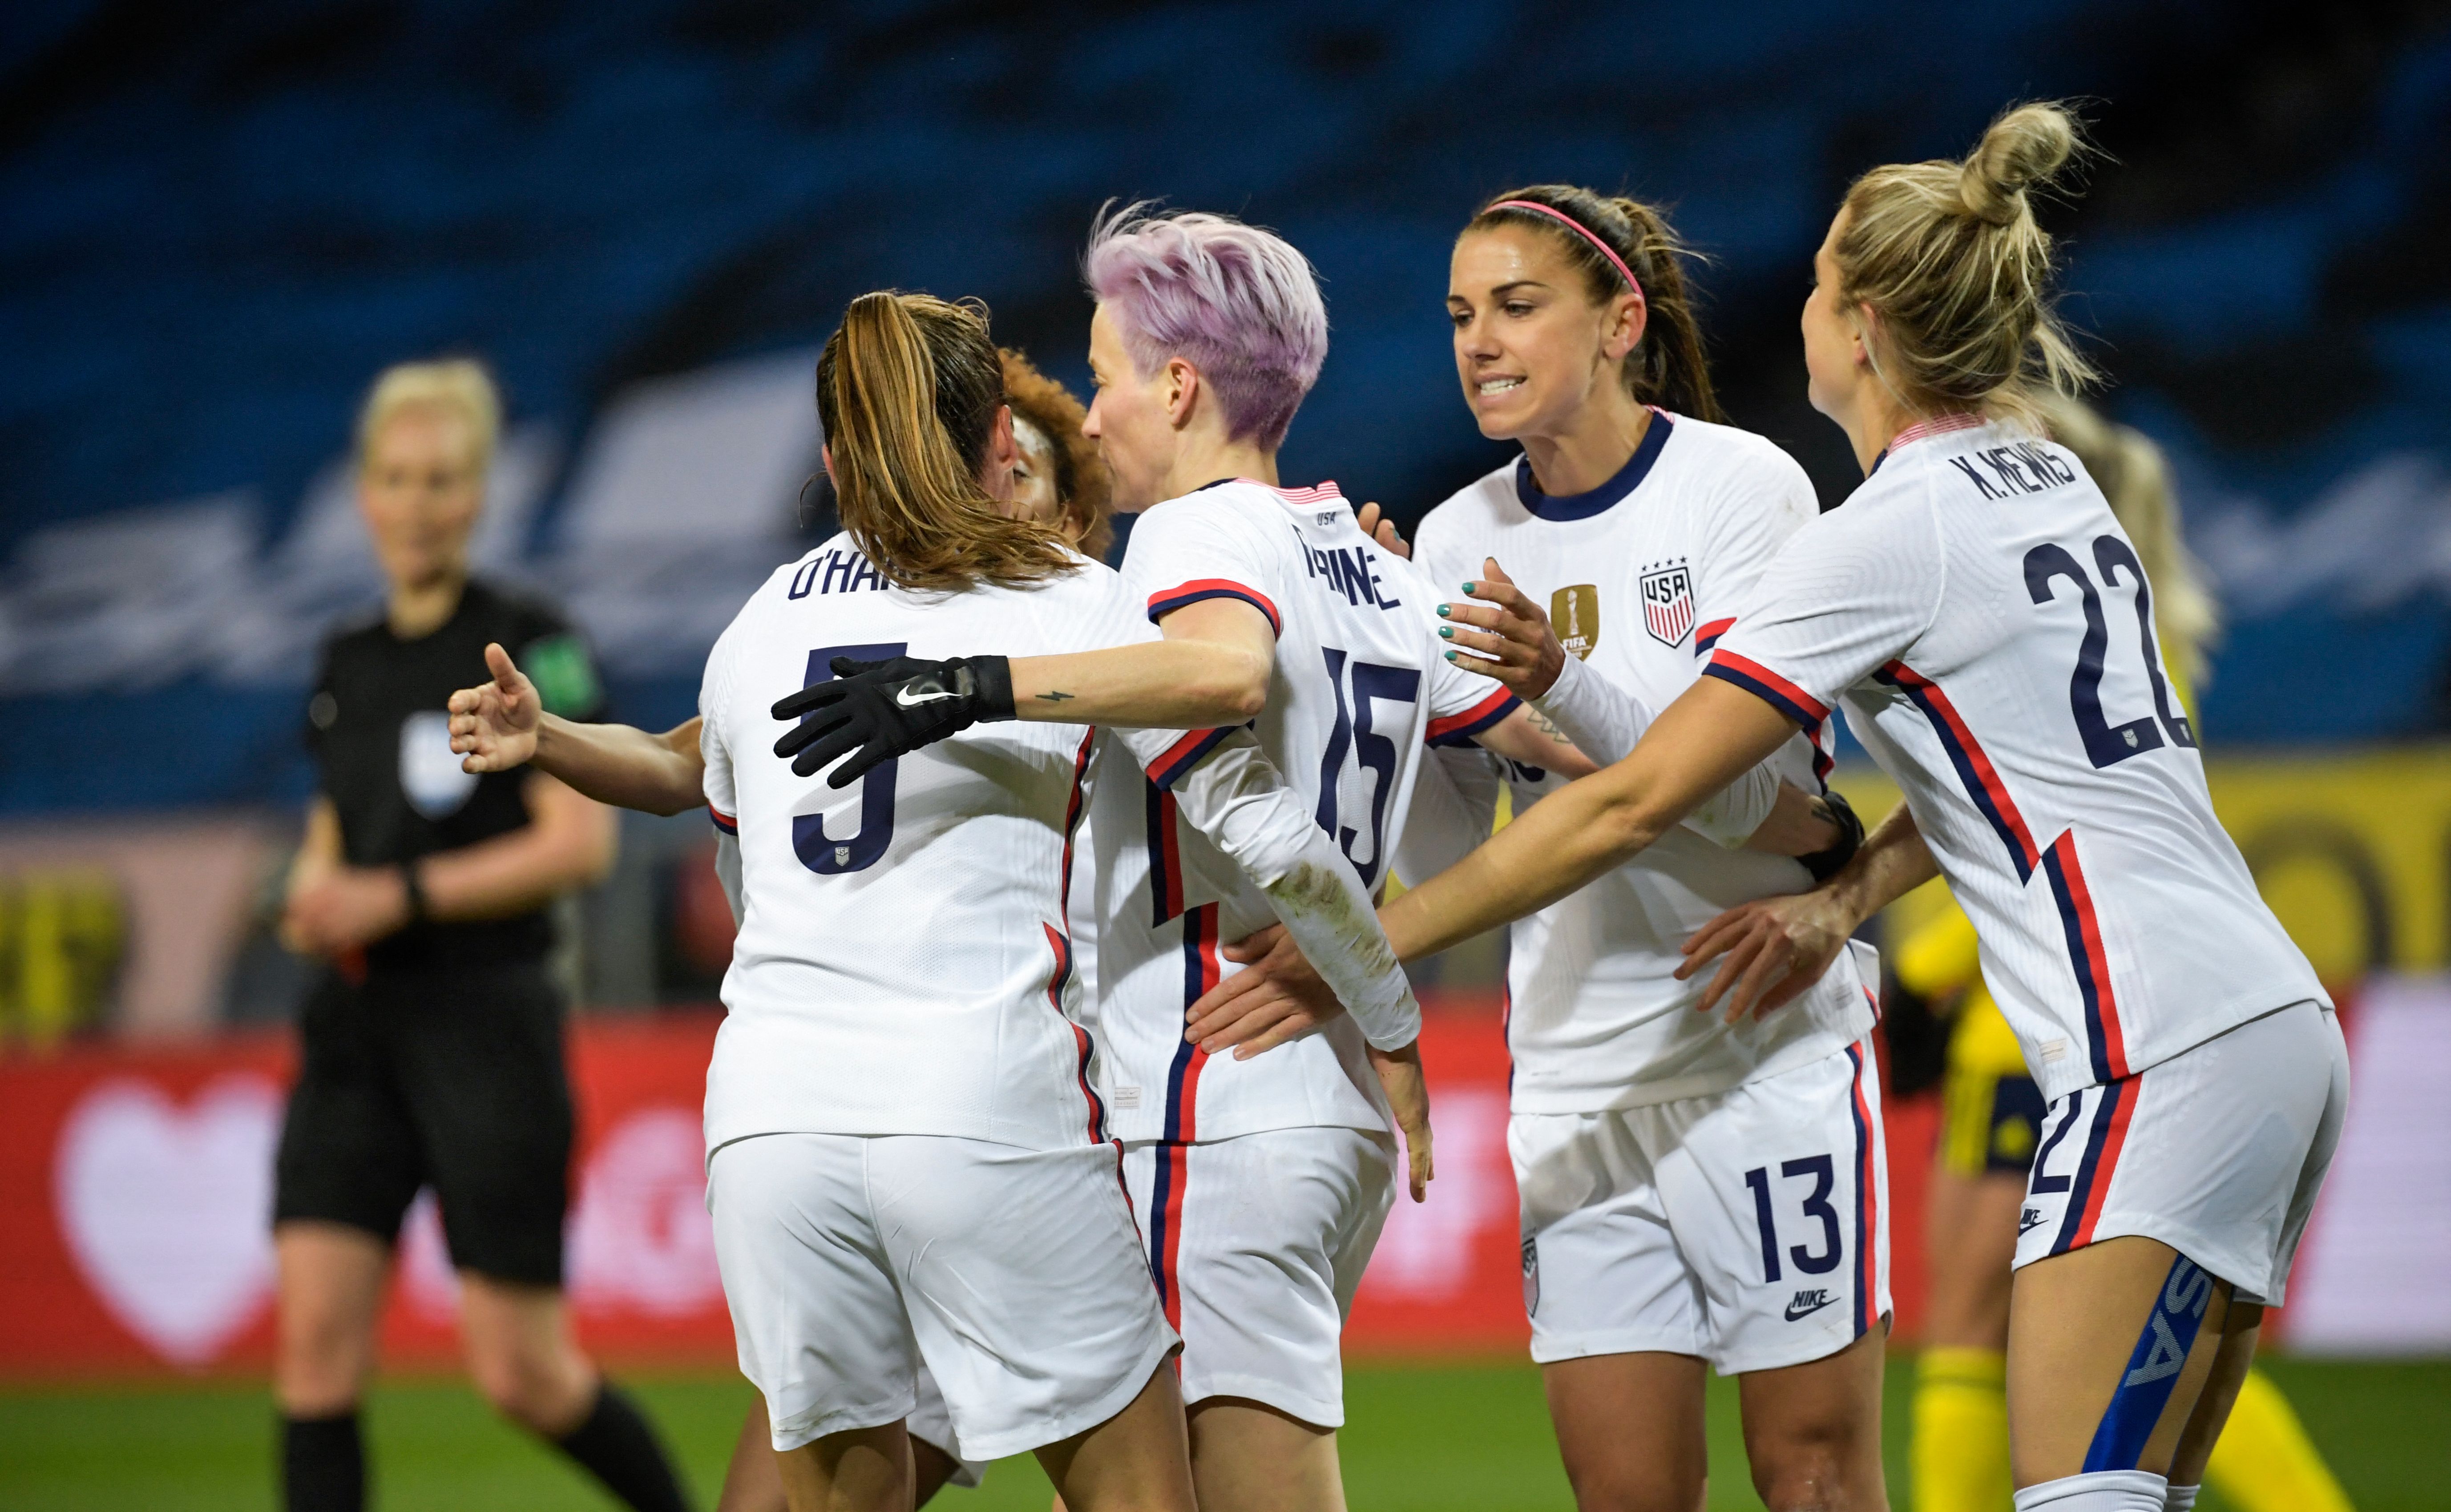 Why A Judge Dismissed U.S. Women's Soccer Team's Claim Of Unequal